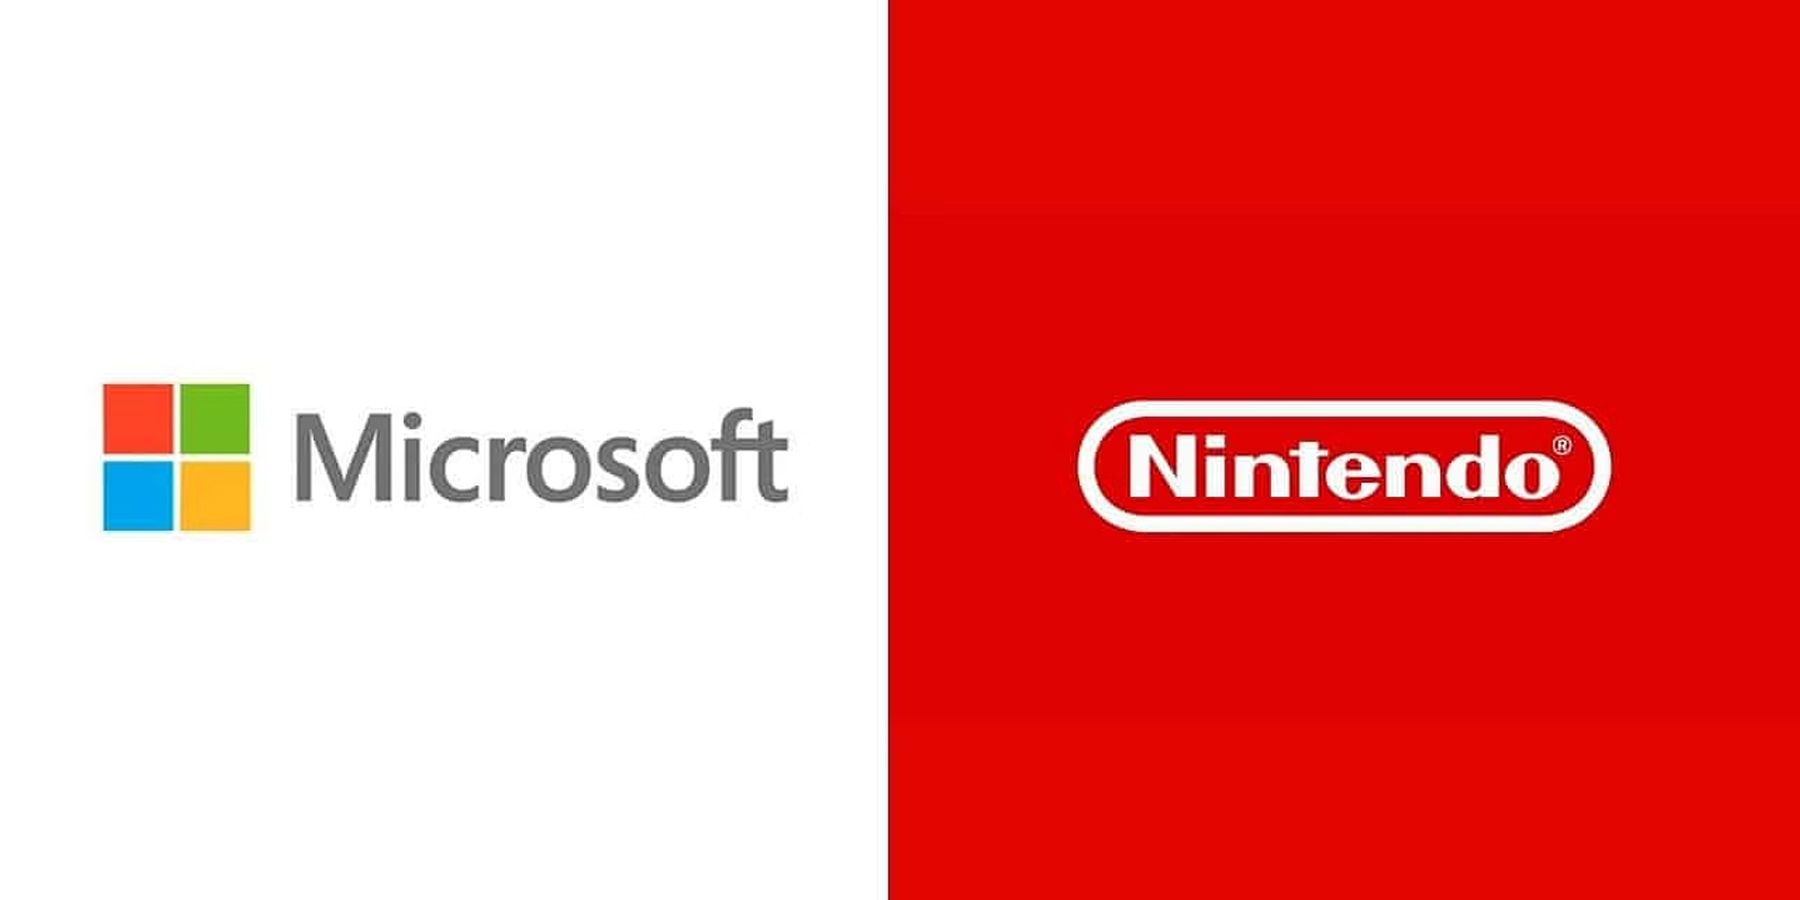 Xbox and Nintendo Sign Agreement to Bring Xbox Games to
Nintendo Consoles